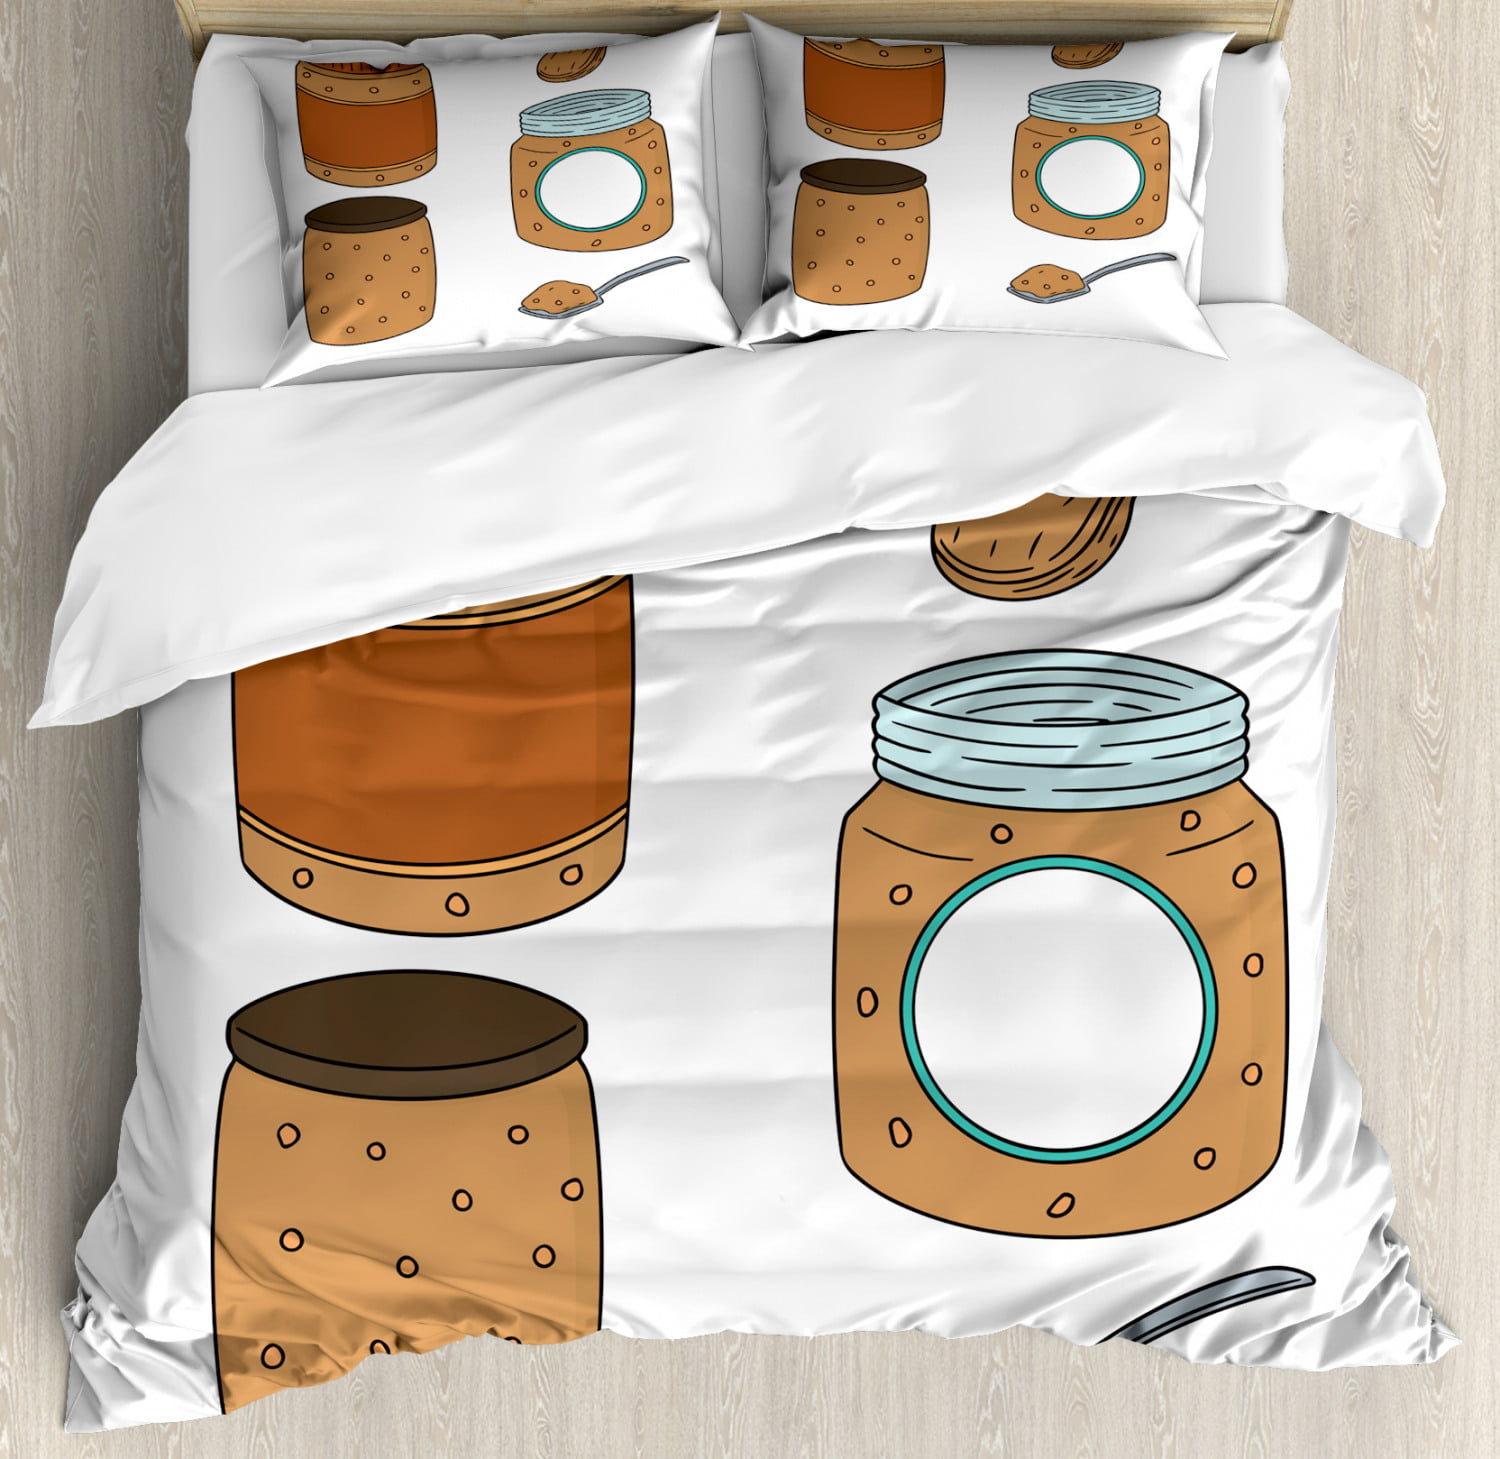 Peanut Butter Duvet Cover Set Queen Size, Cartoon Breakfast Smooth and  Crunchy Varieties Food in a Jar, 3 Piece Bedding Set with 2 Pillow Shams,  Brown Pale Blue Pale Brown, by Ambesonne -